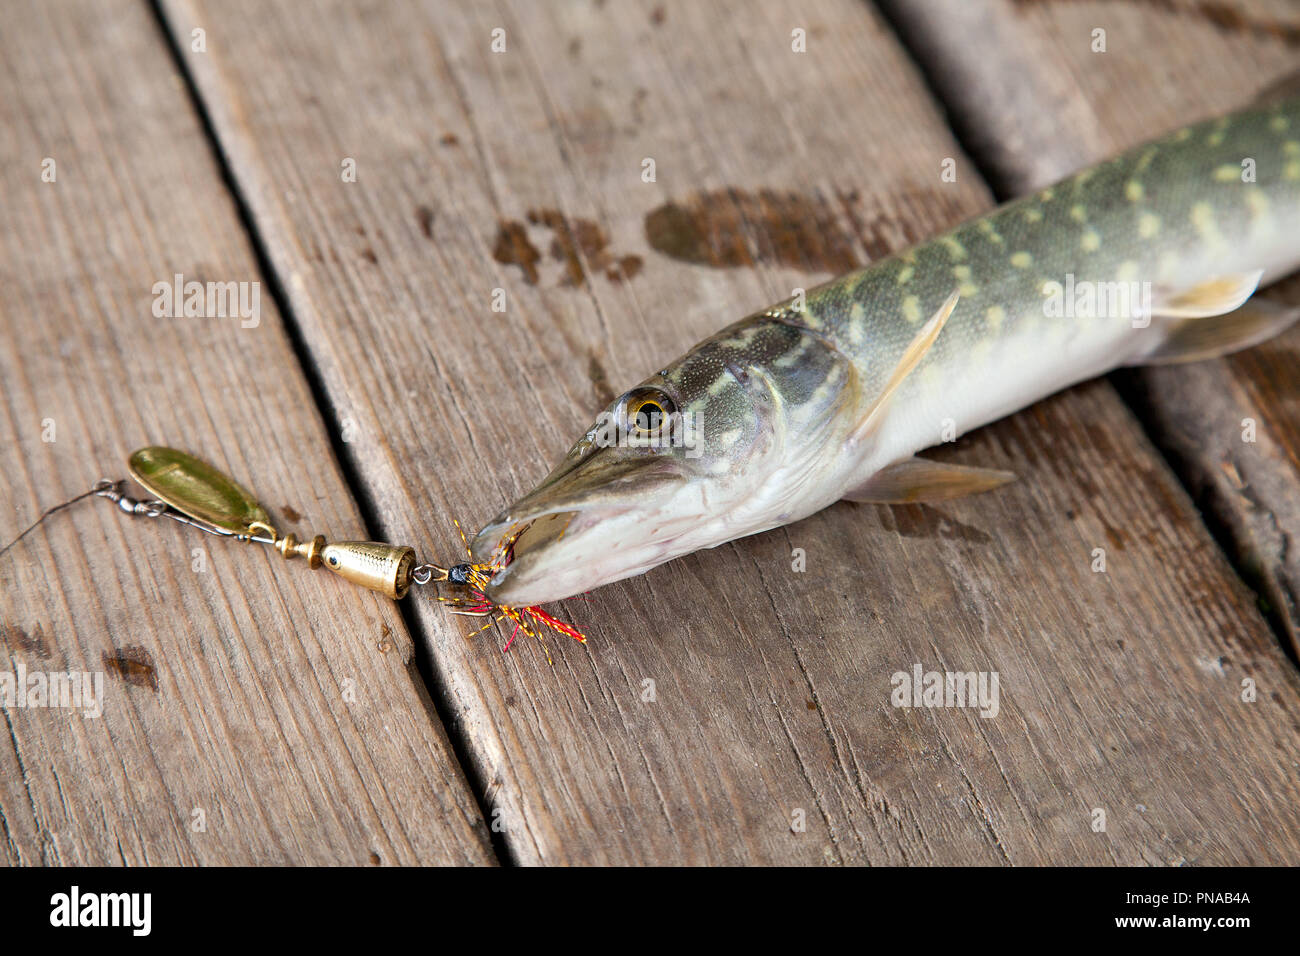 https://c8.alamy.com/comp/PNAB4A/freshwater-northern-pike-fish-know-as-esox-lucius-with-lure-in-mouth-lying-on-vintage-wooden-background-fishing-concept-good-catch-big-freshwater-PNAB4A.jpg